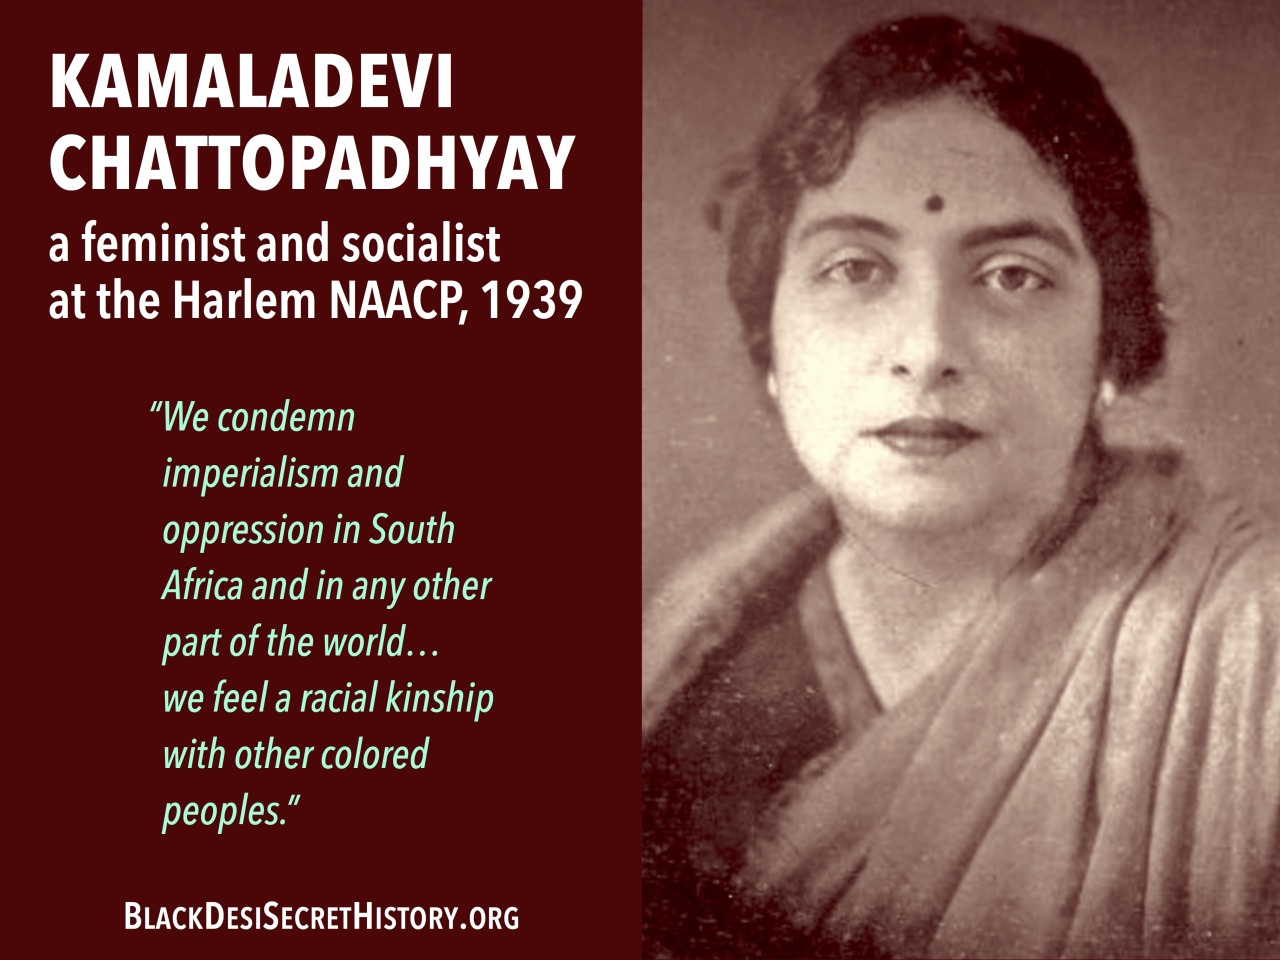 KAMALADEVI CHATTOPADHYAY, a feminist and socialist at the Harlem NAACP, 1939: “We condemn imperialism and oppression in South Africa and in any other part of the world…we feel a racial kinship with other colored peoples.”